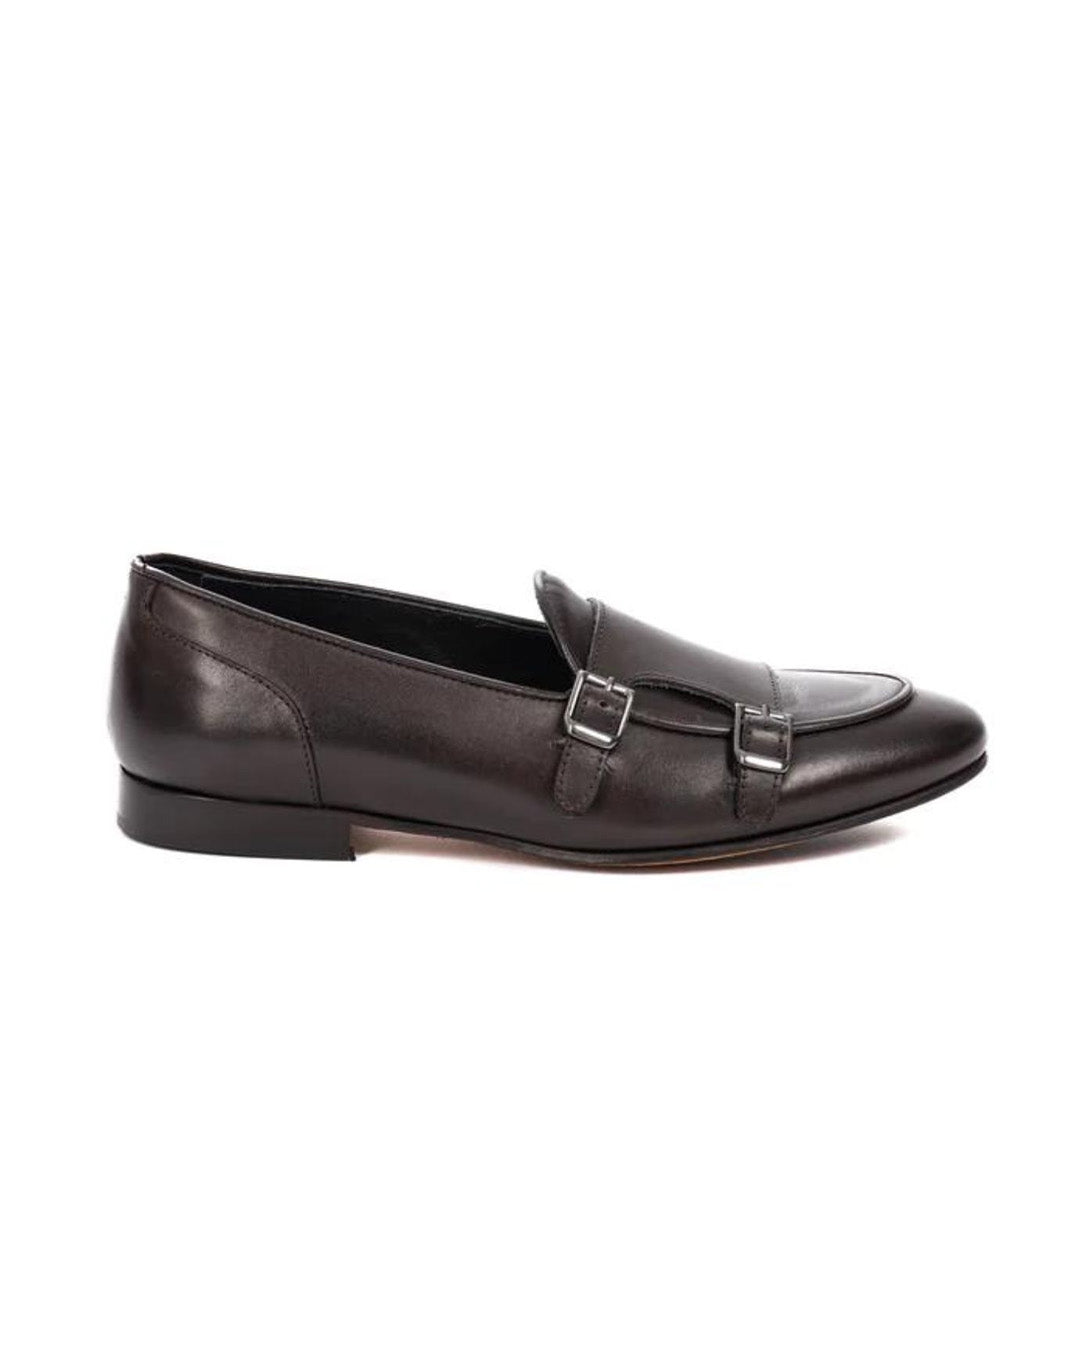 Gianni - dark brown moccasin with double buckle